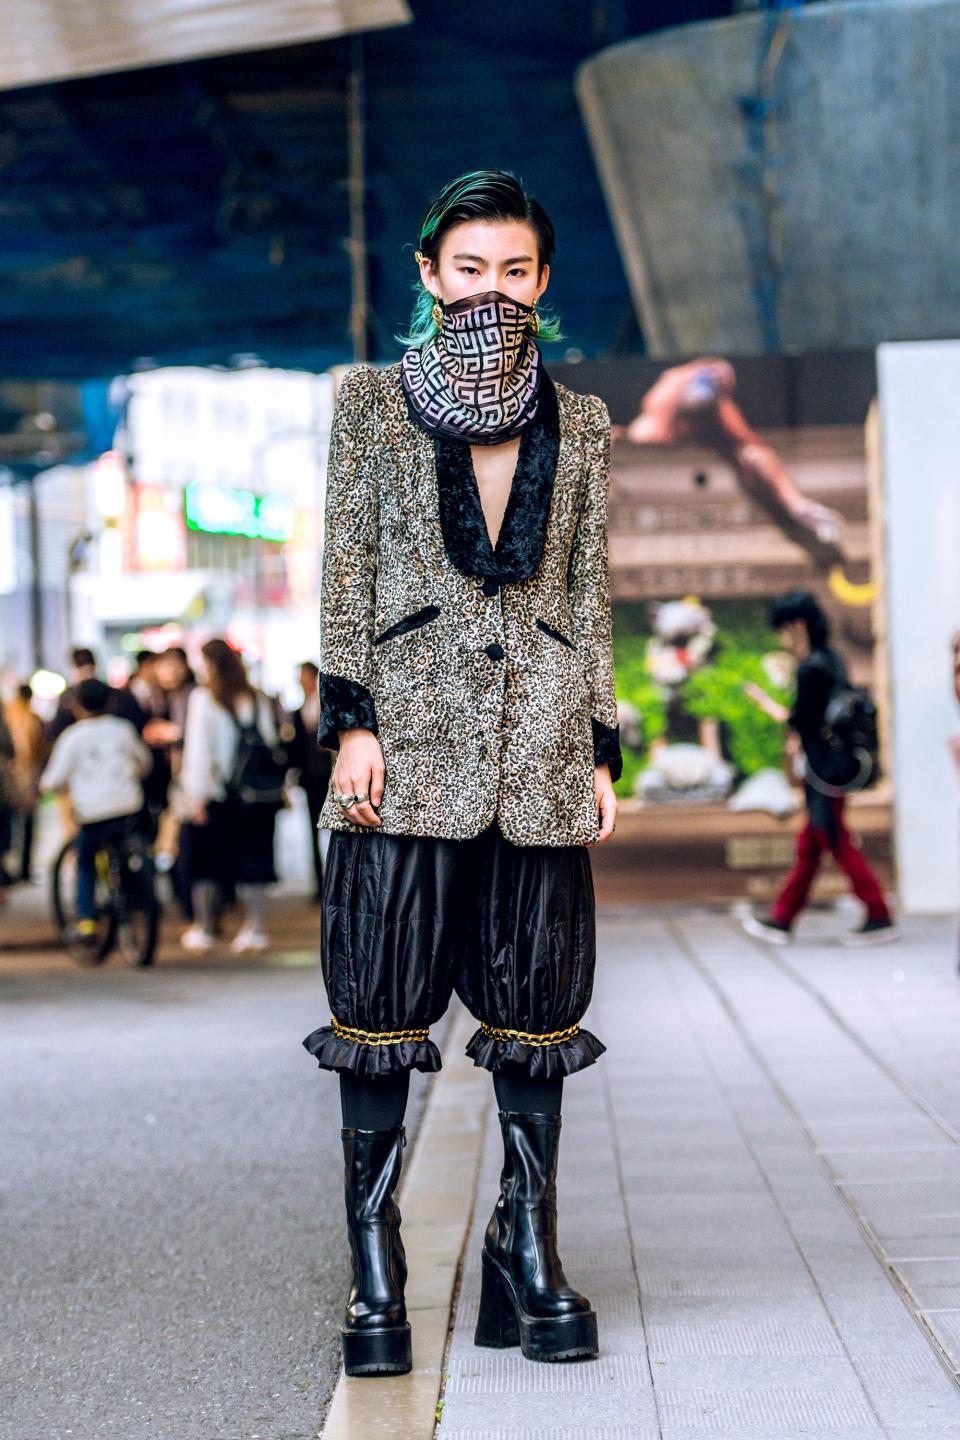 This season at Tokyo Fashion Week, the Japanese capital’s boldest peacocks offered much to marvel at above the neck.